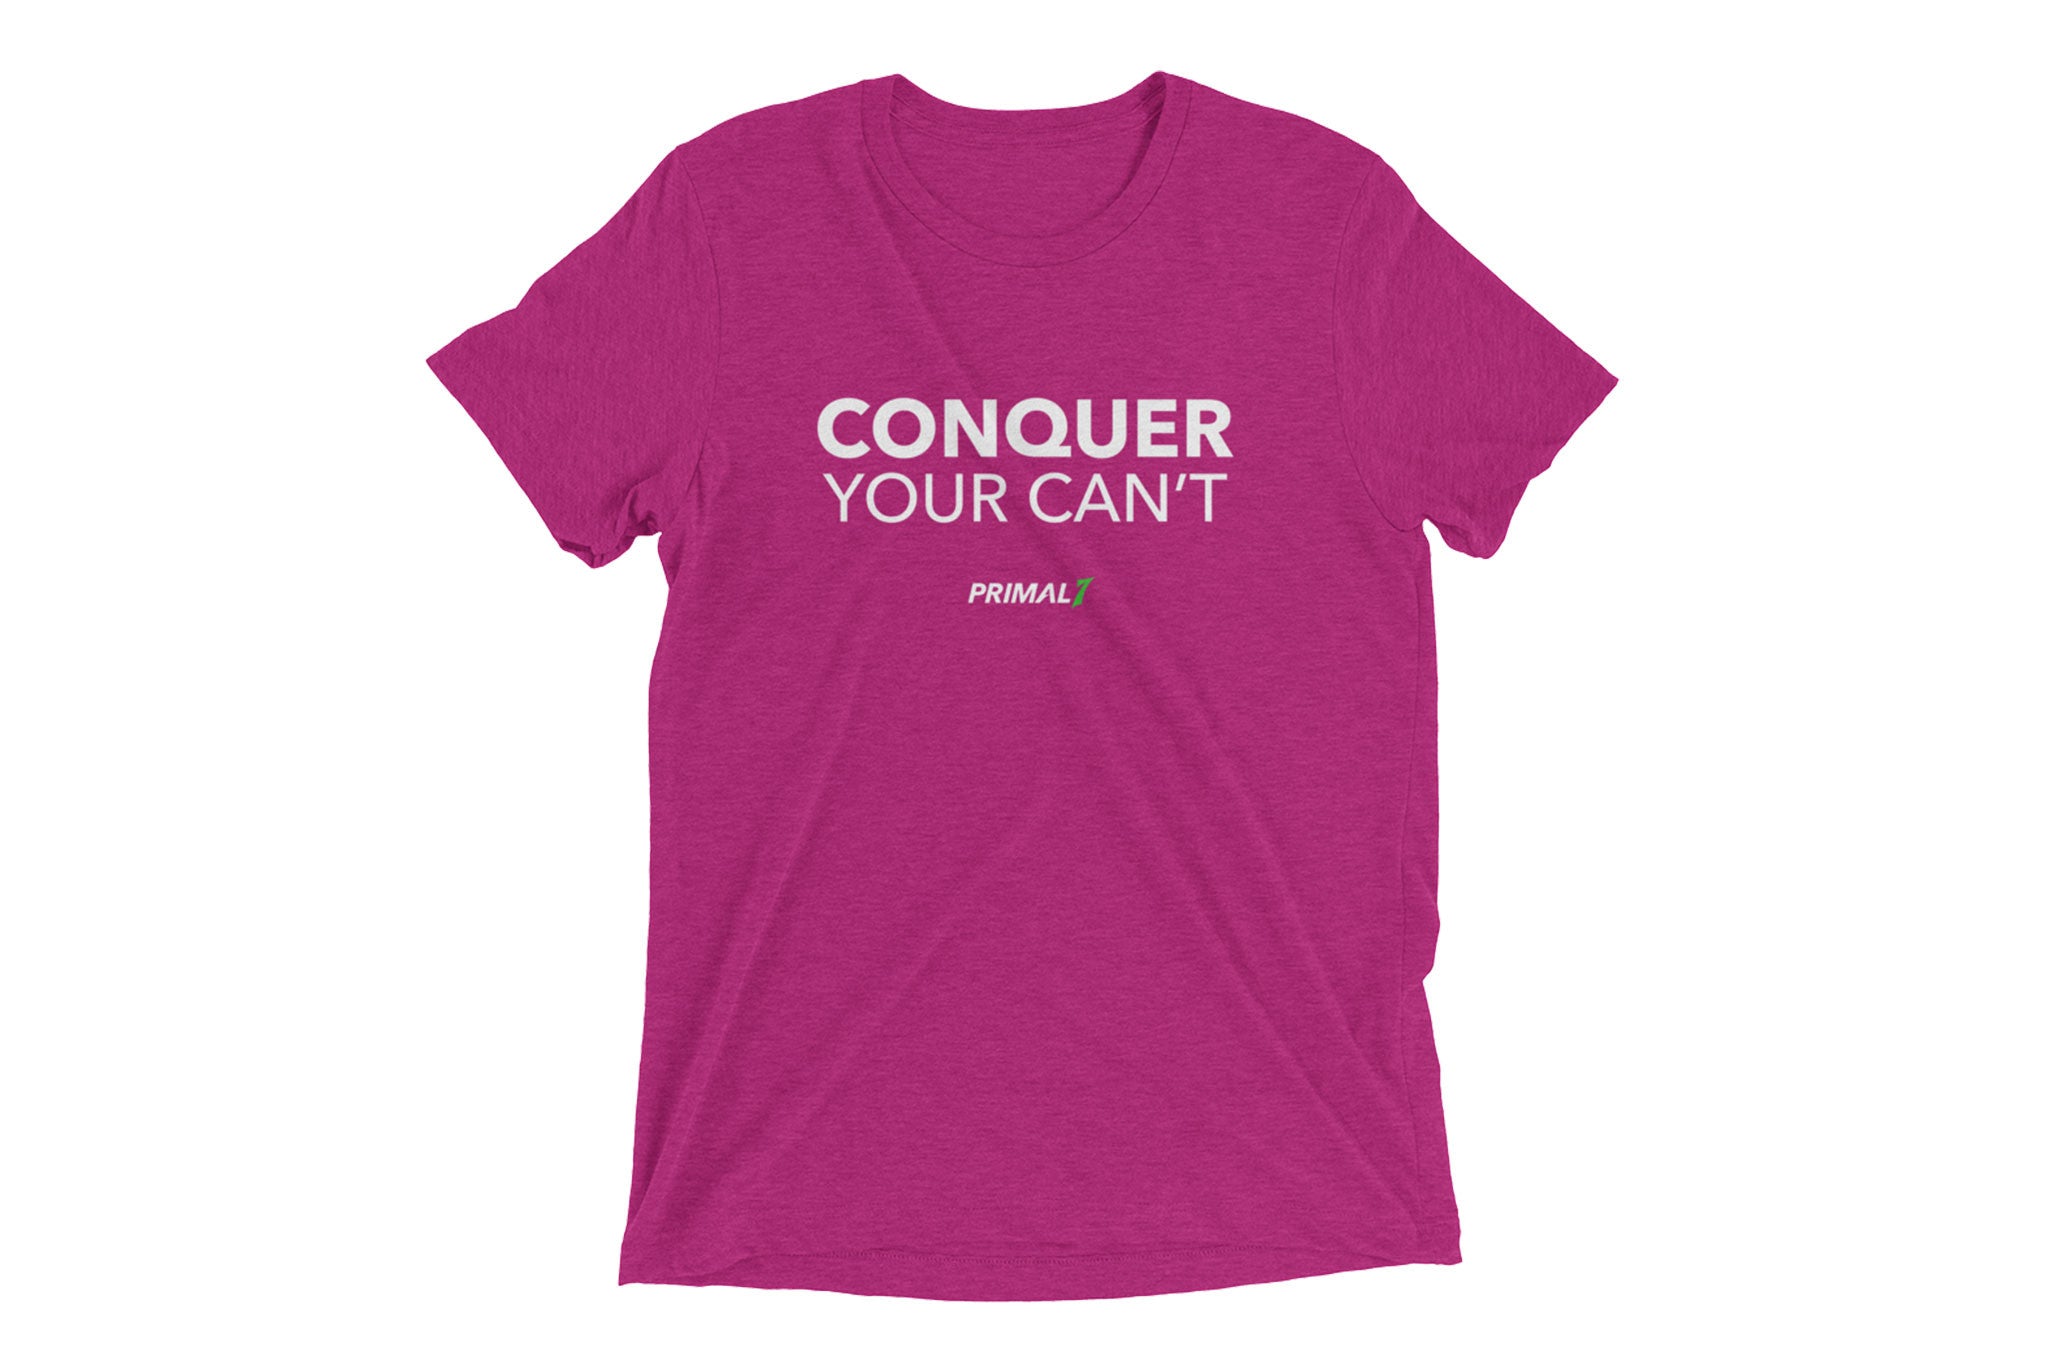 Primal 7 Conquer Your Can't T-Shirt Berry